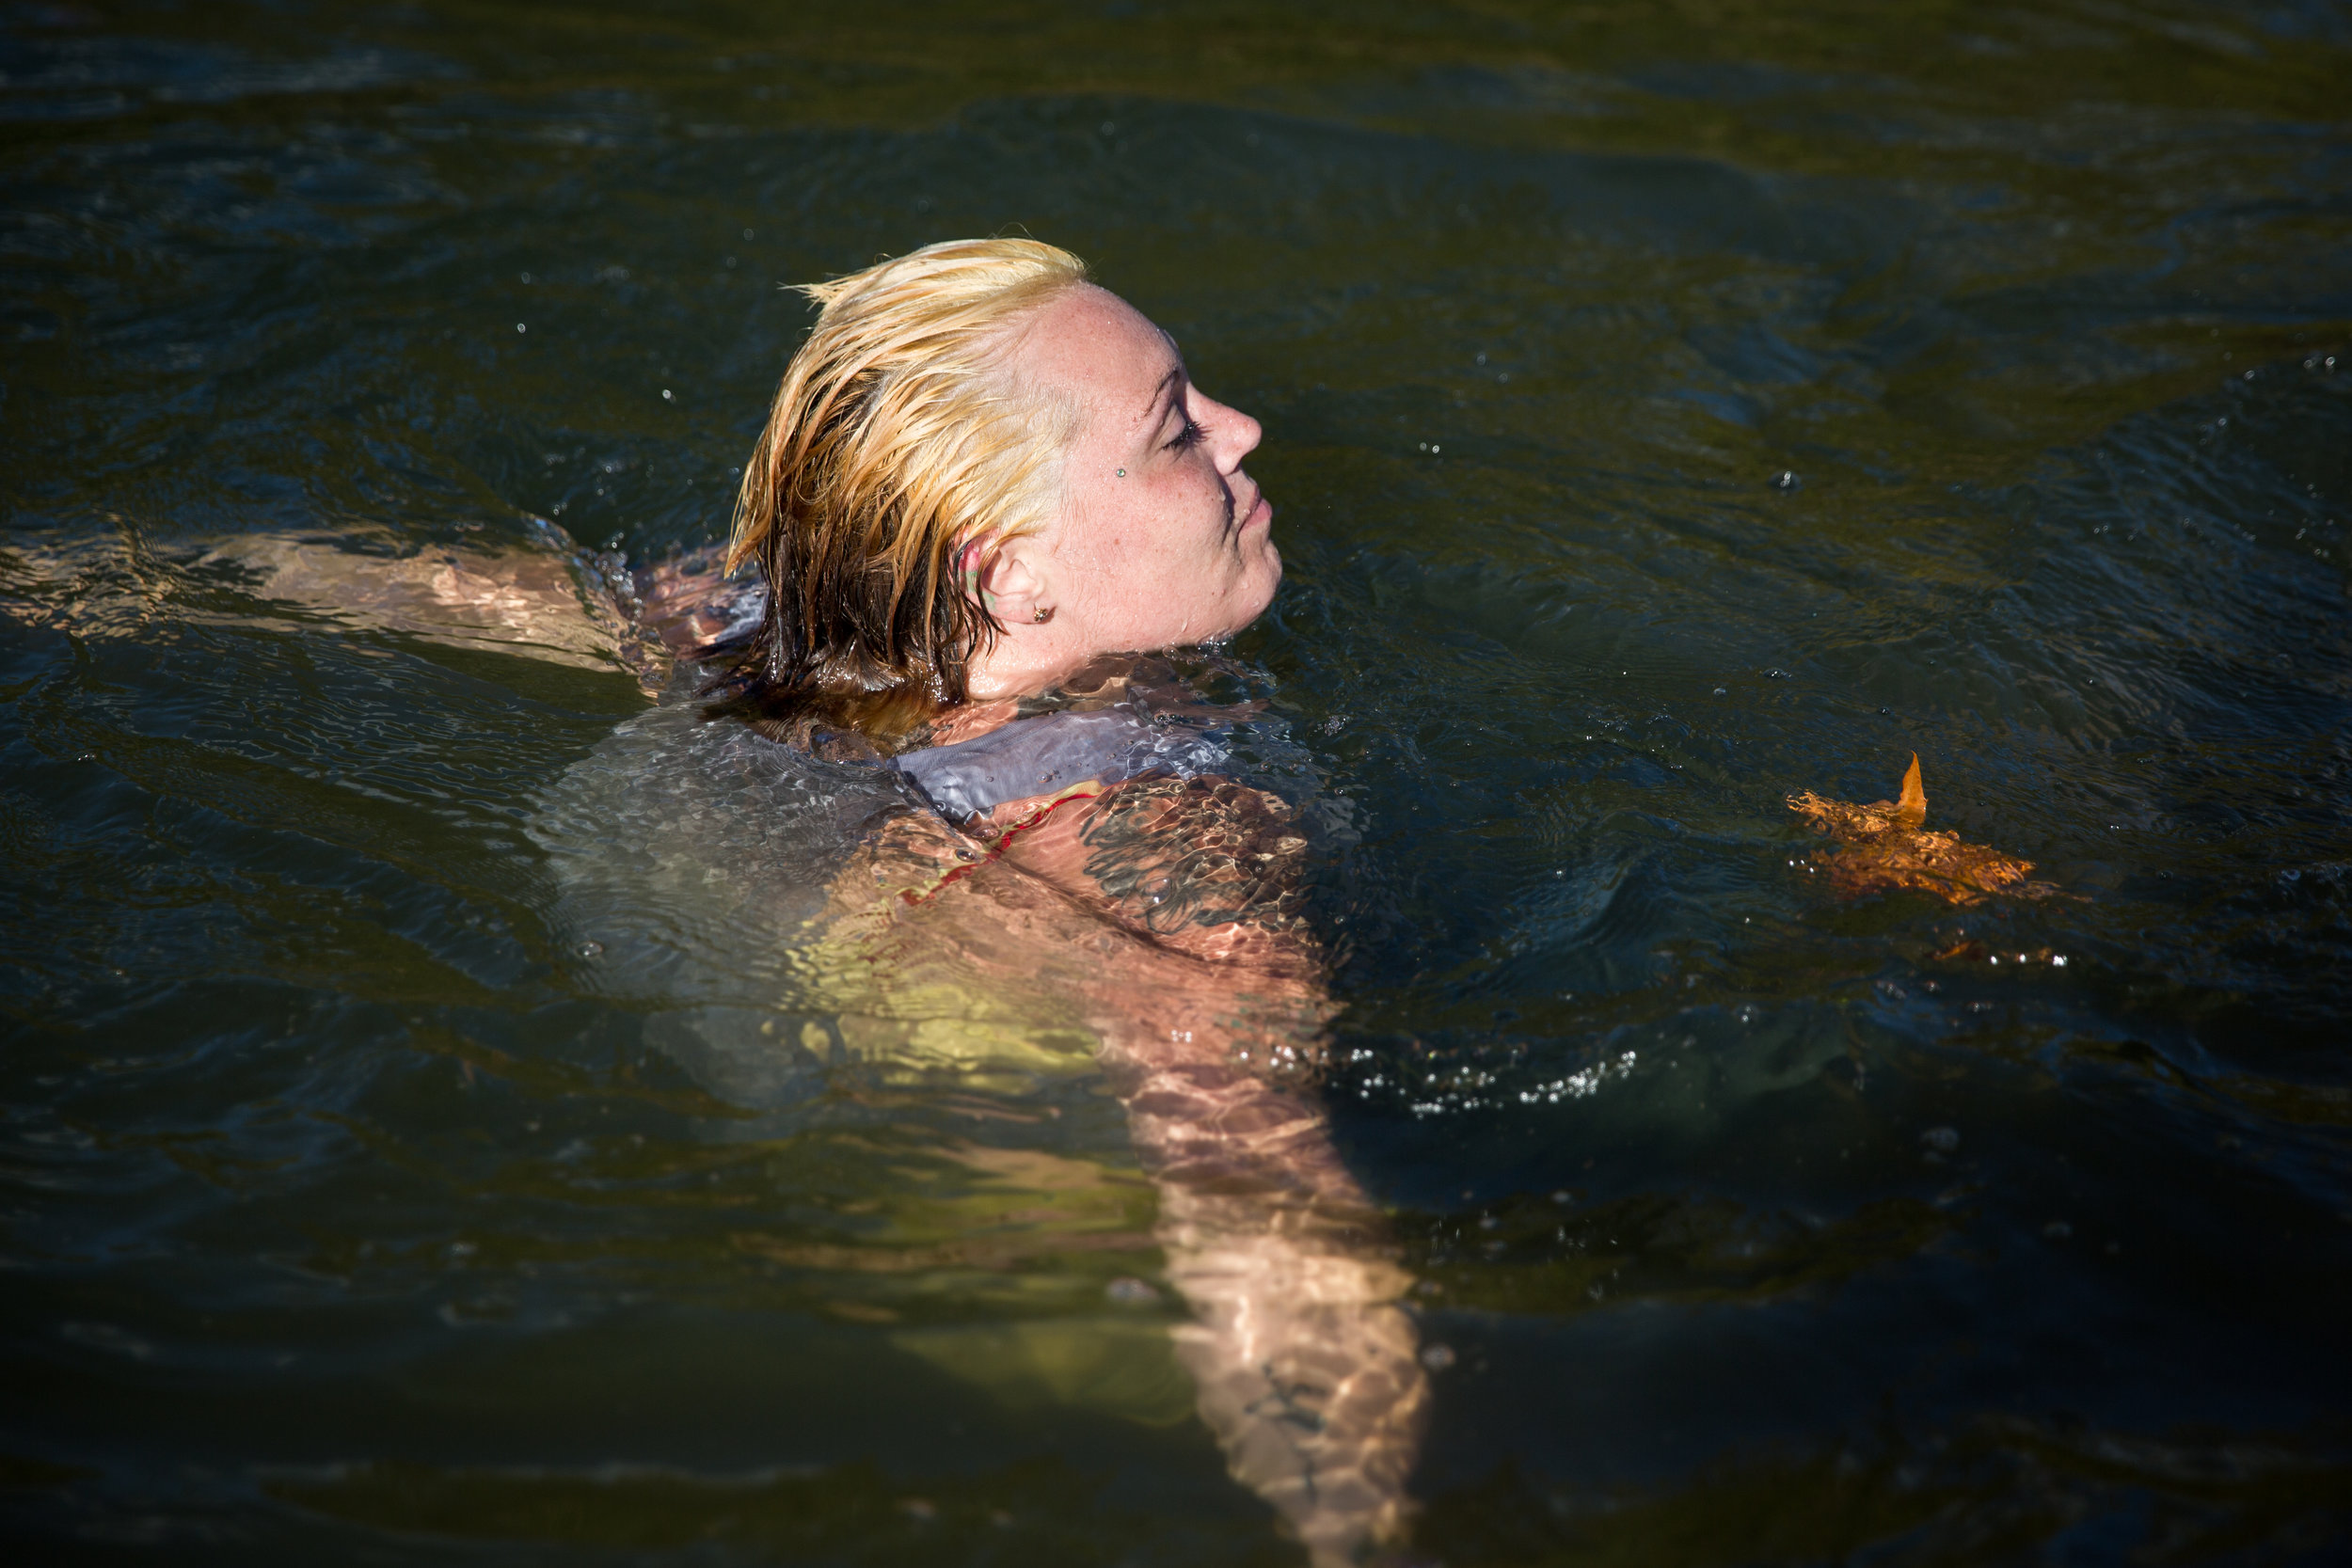  Whitney floats in the river after Jeremy's baptism. The river abuts Whitney's adoptive parents' property, and she often finds herself there when she needs to find peace or talk to God. 